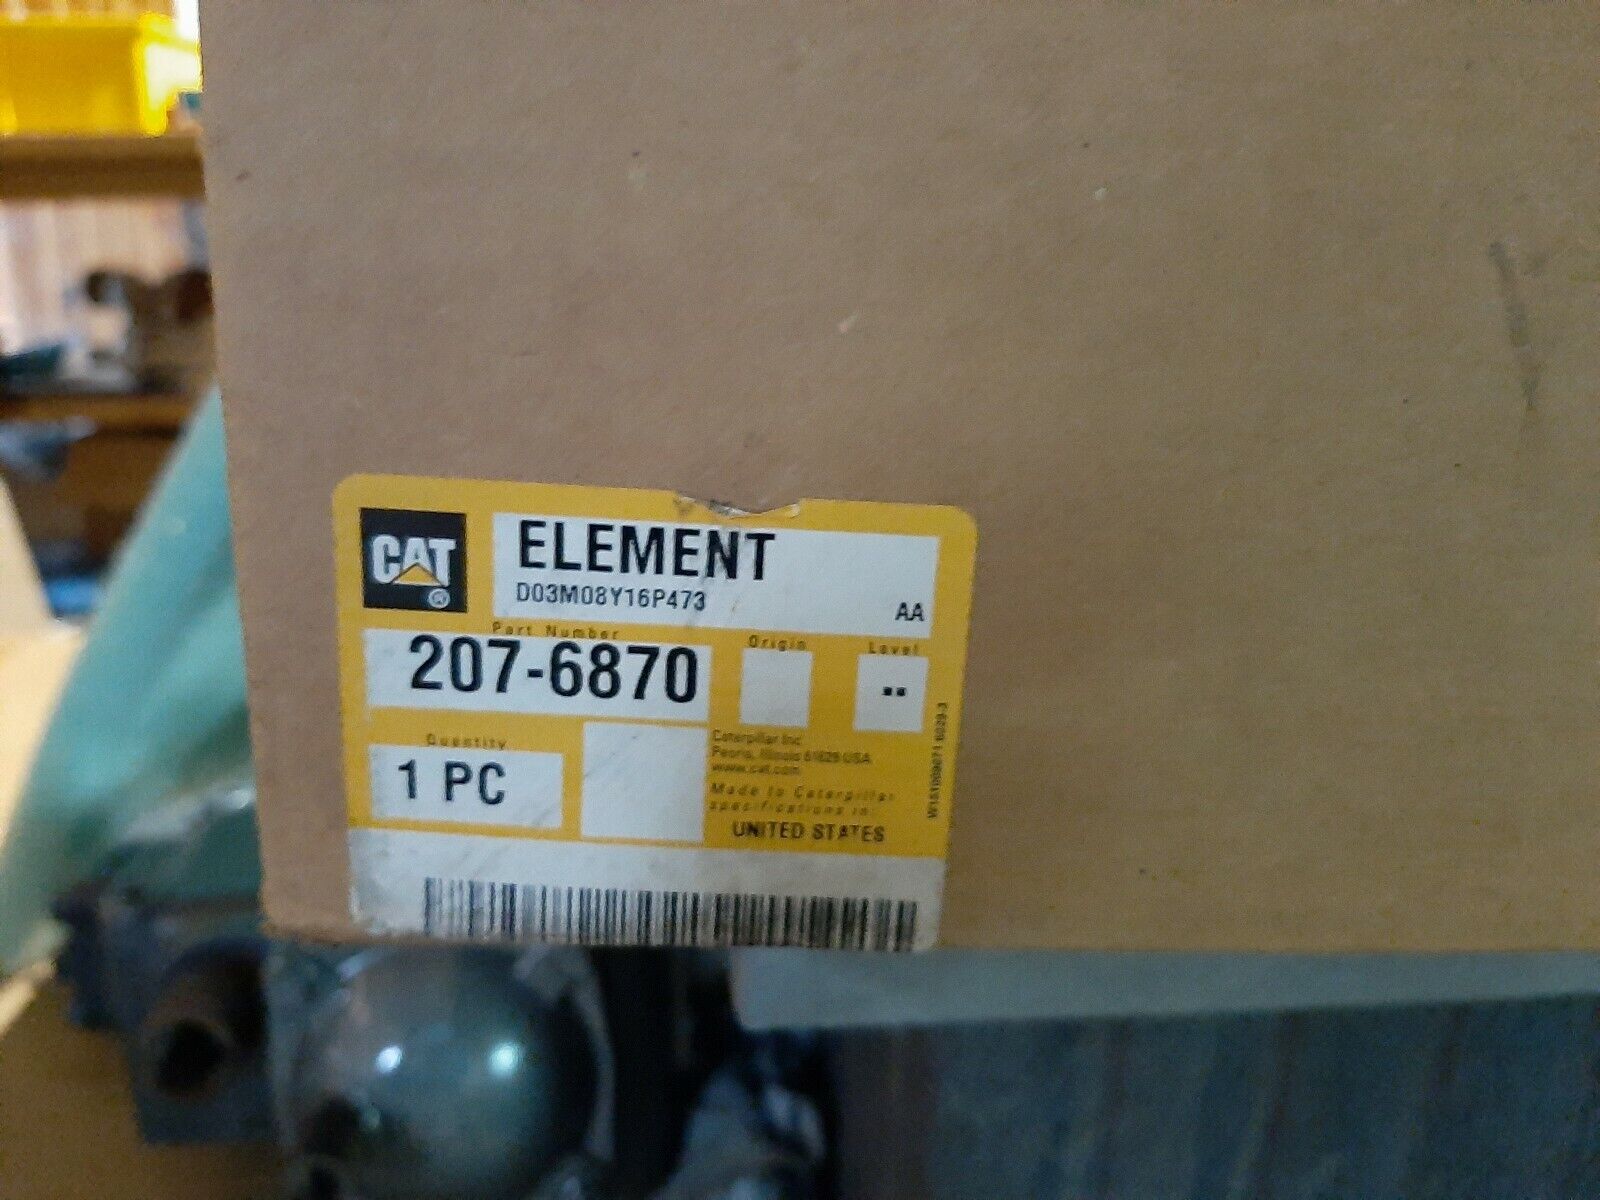 CATERPILLAR OEM 207-6870 AIR FILTER / ELEMENT C32 ENGINE USED IN BOX FREE SHIP